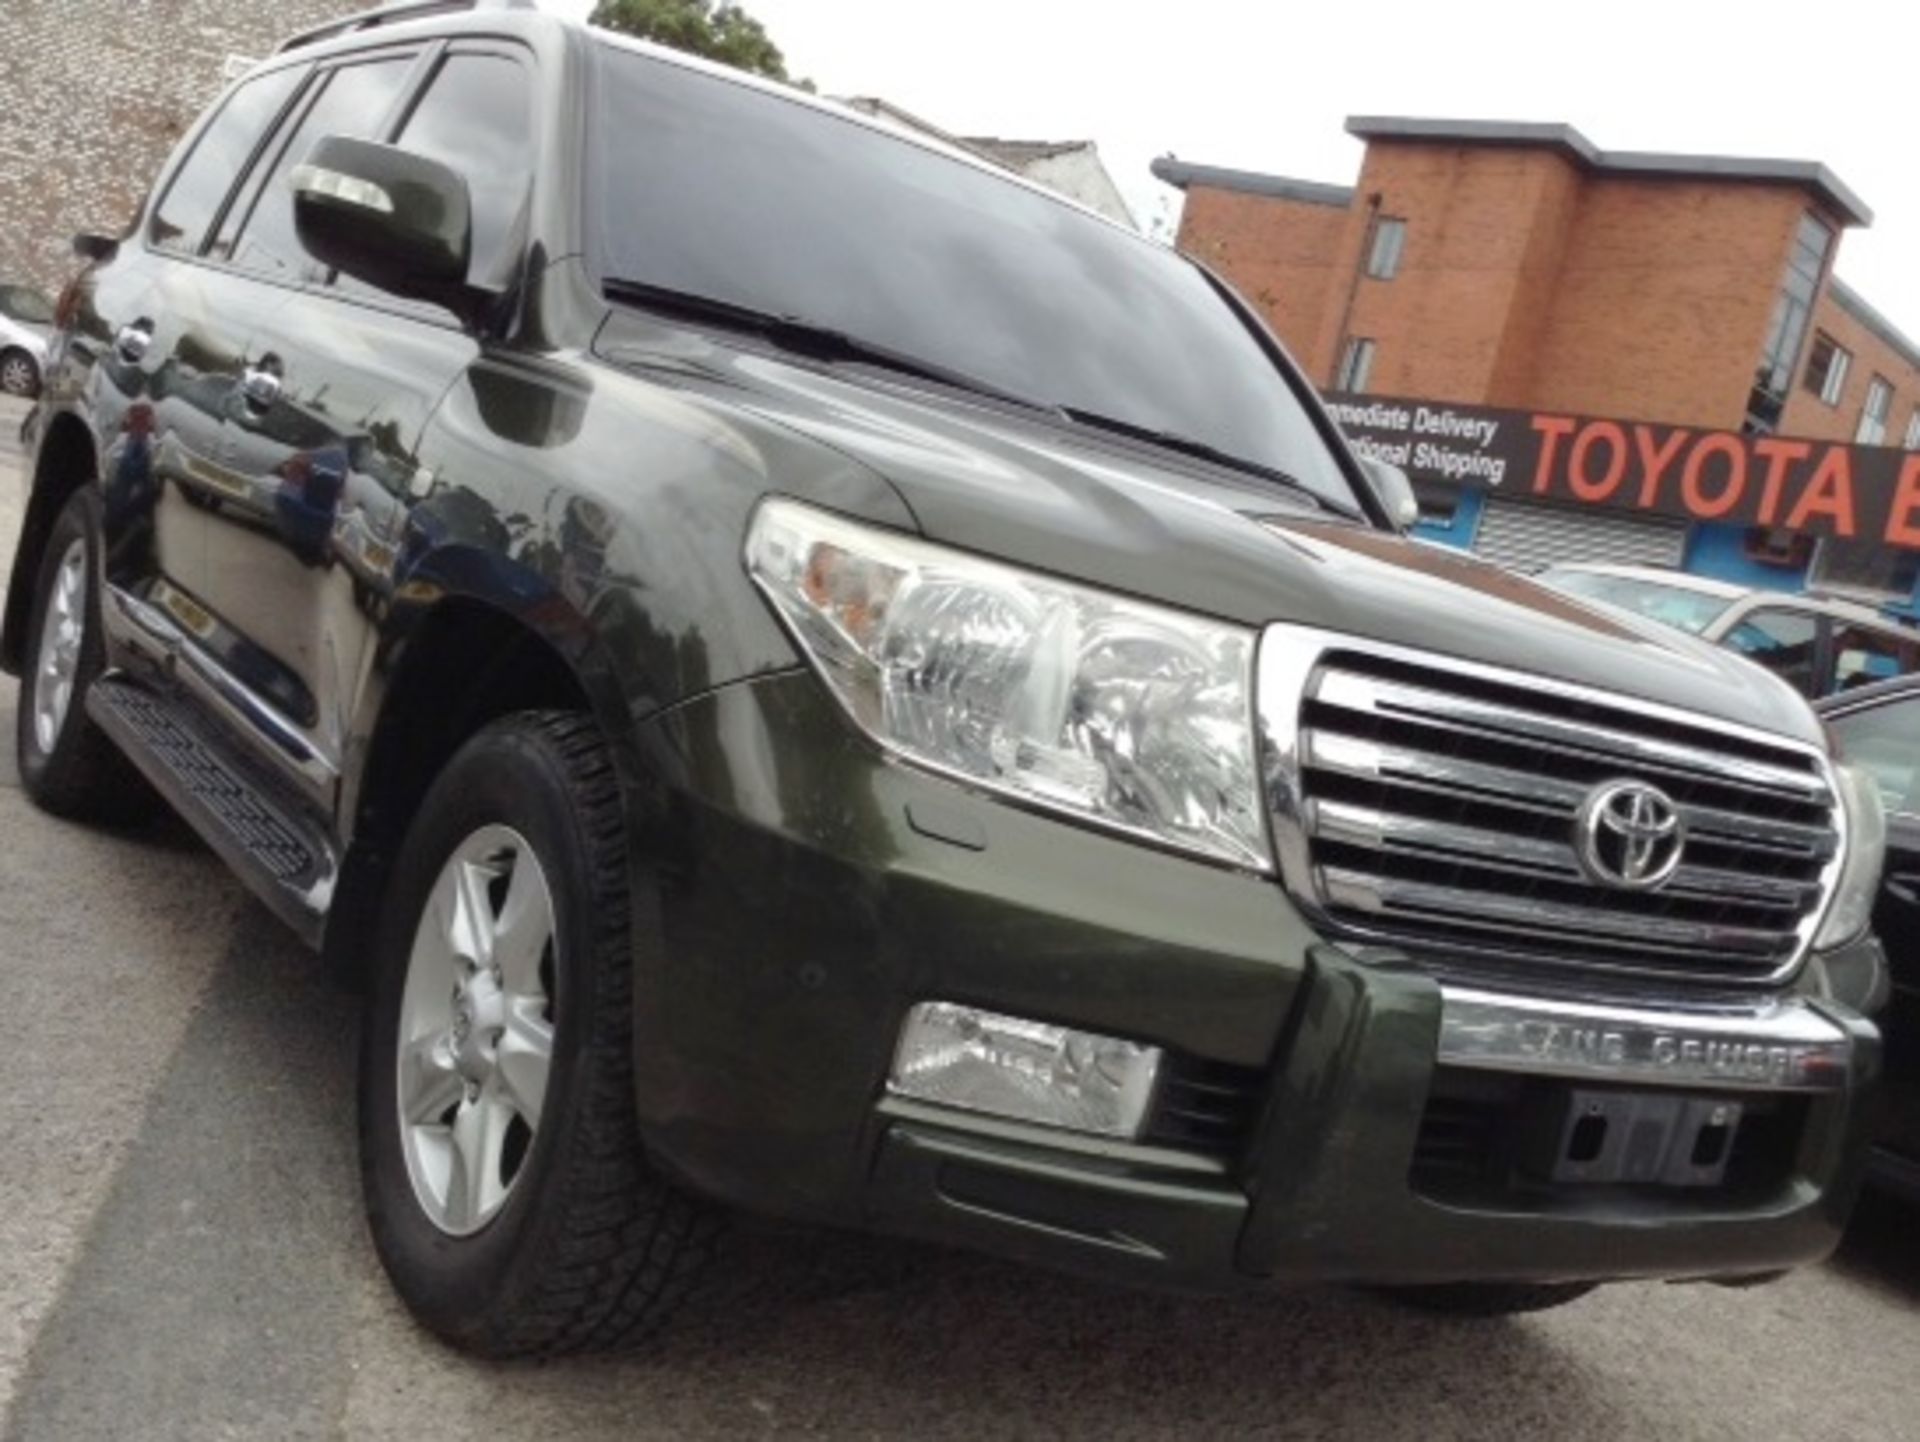 1 x Toyota Land Cruiser Amazon V8 VX-R 4.7 Petrol - Year 2010 - Left Hand Drive - Middle Eastern - Image 2 of 15